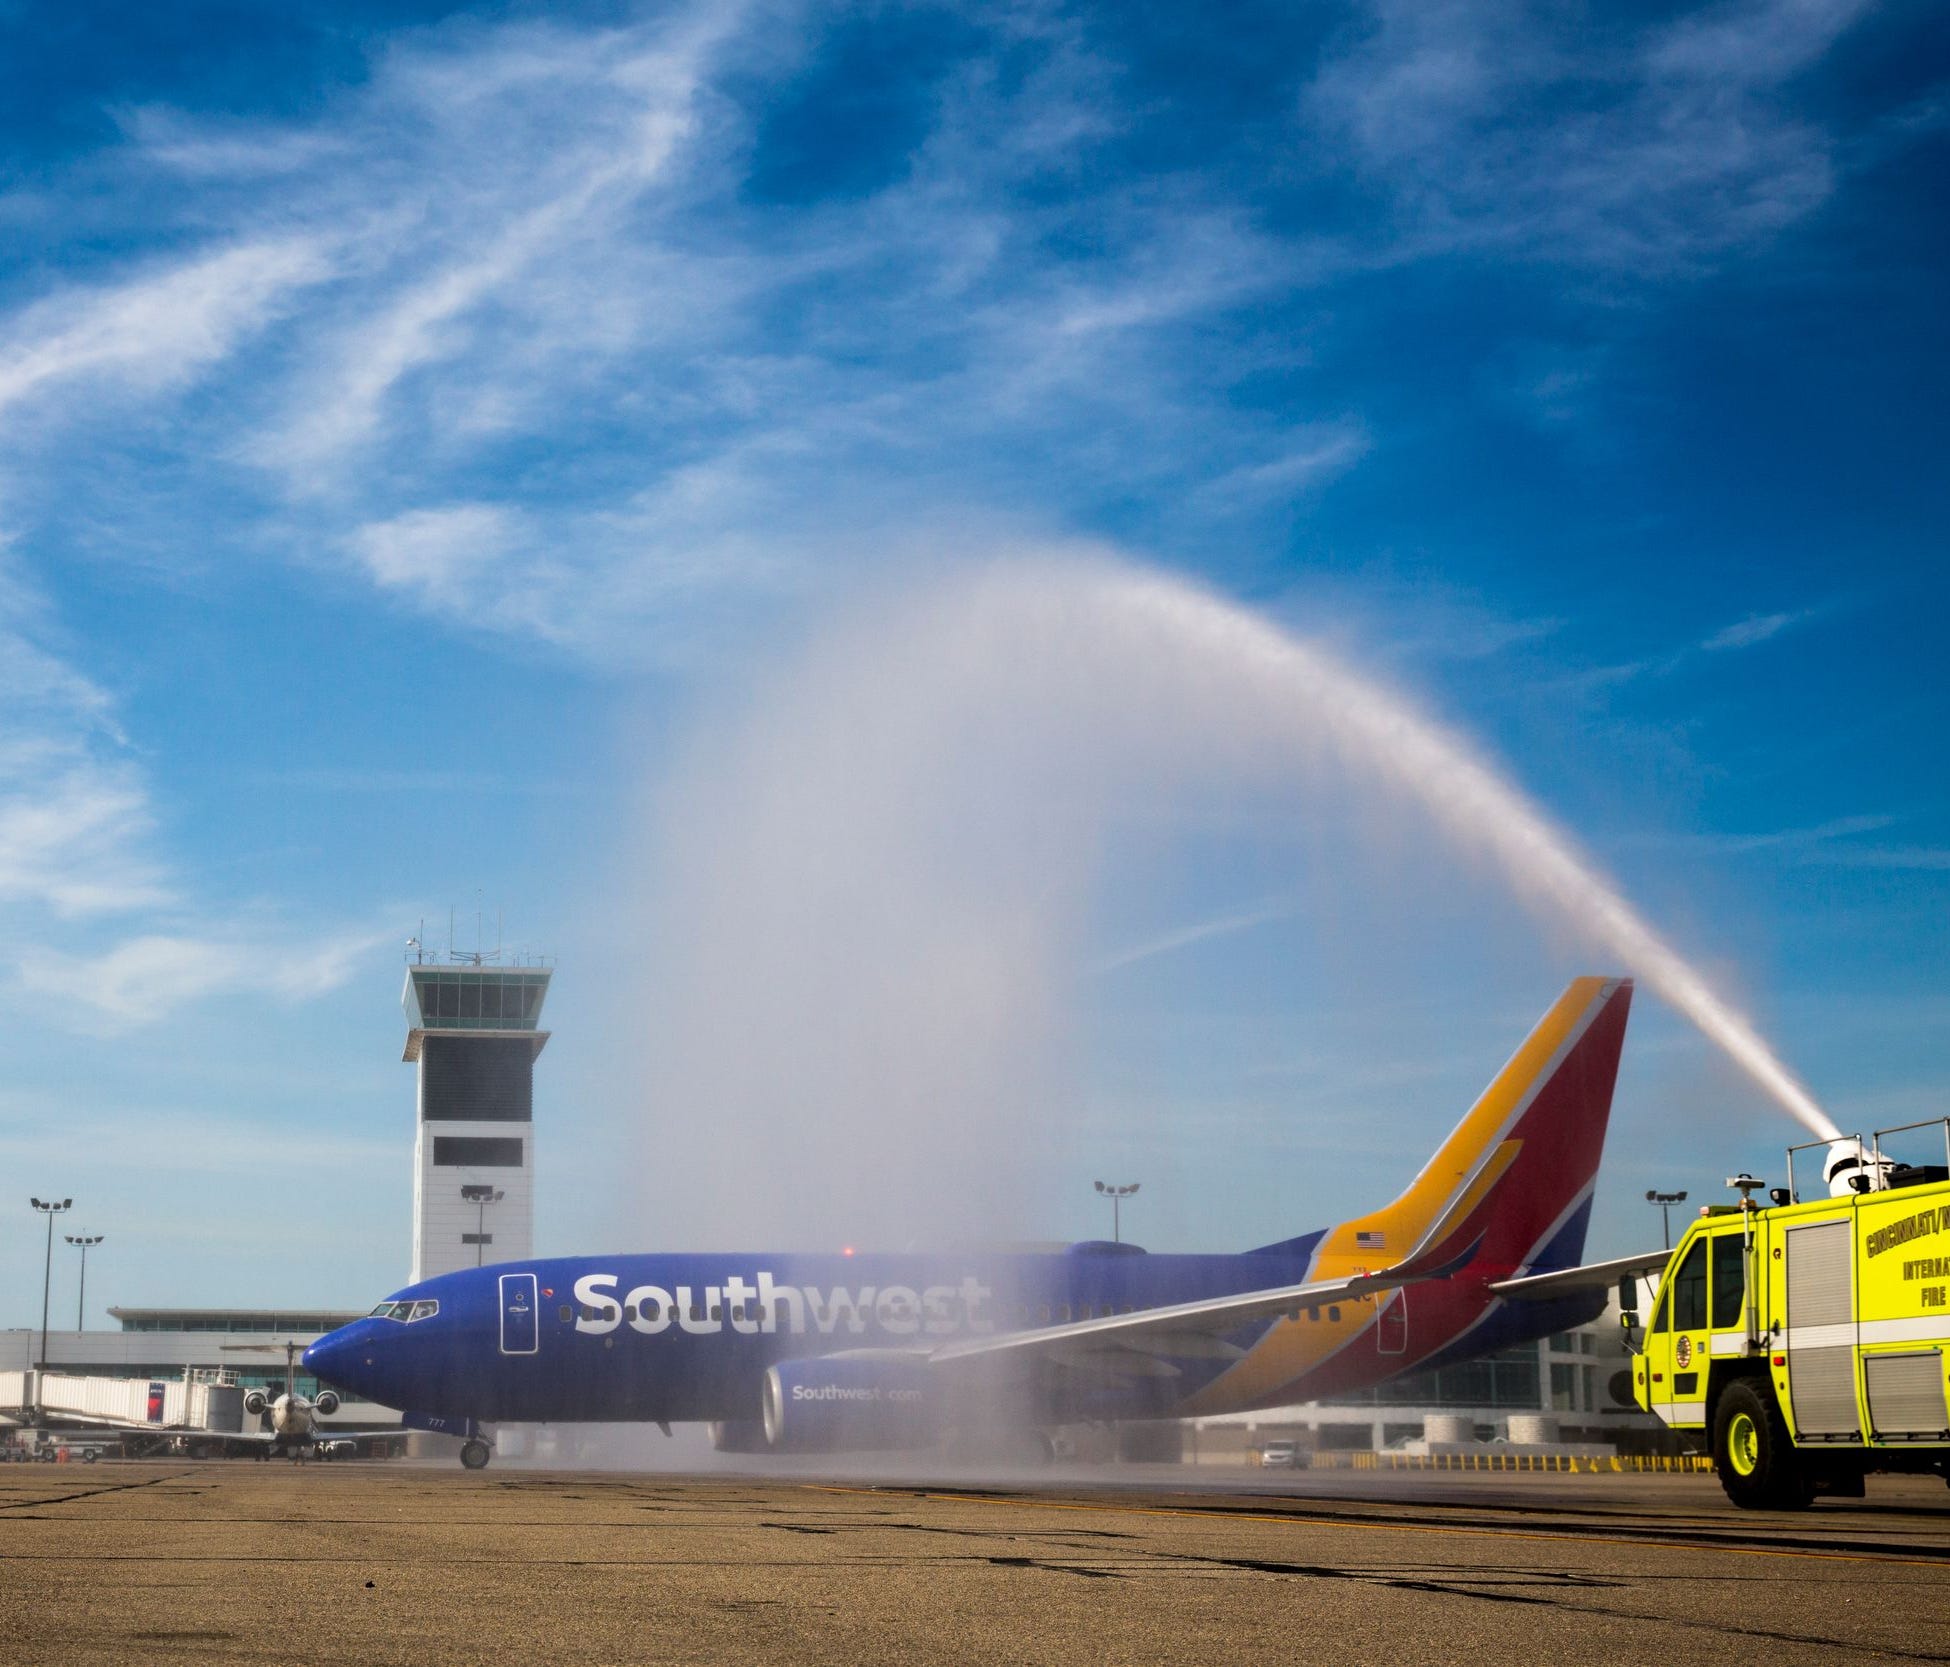 The first Southwest plane to take off from Cincinnati/Northern Kentucky International Airport receives a traditional water-cannon salute on Sunday, June 4, 2017.